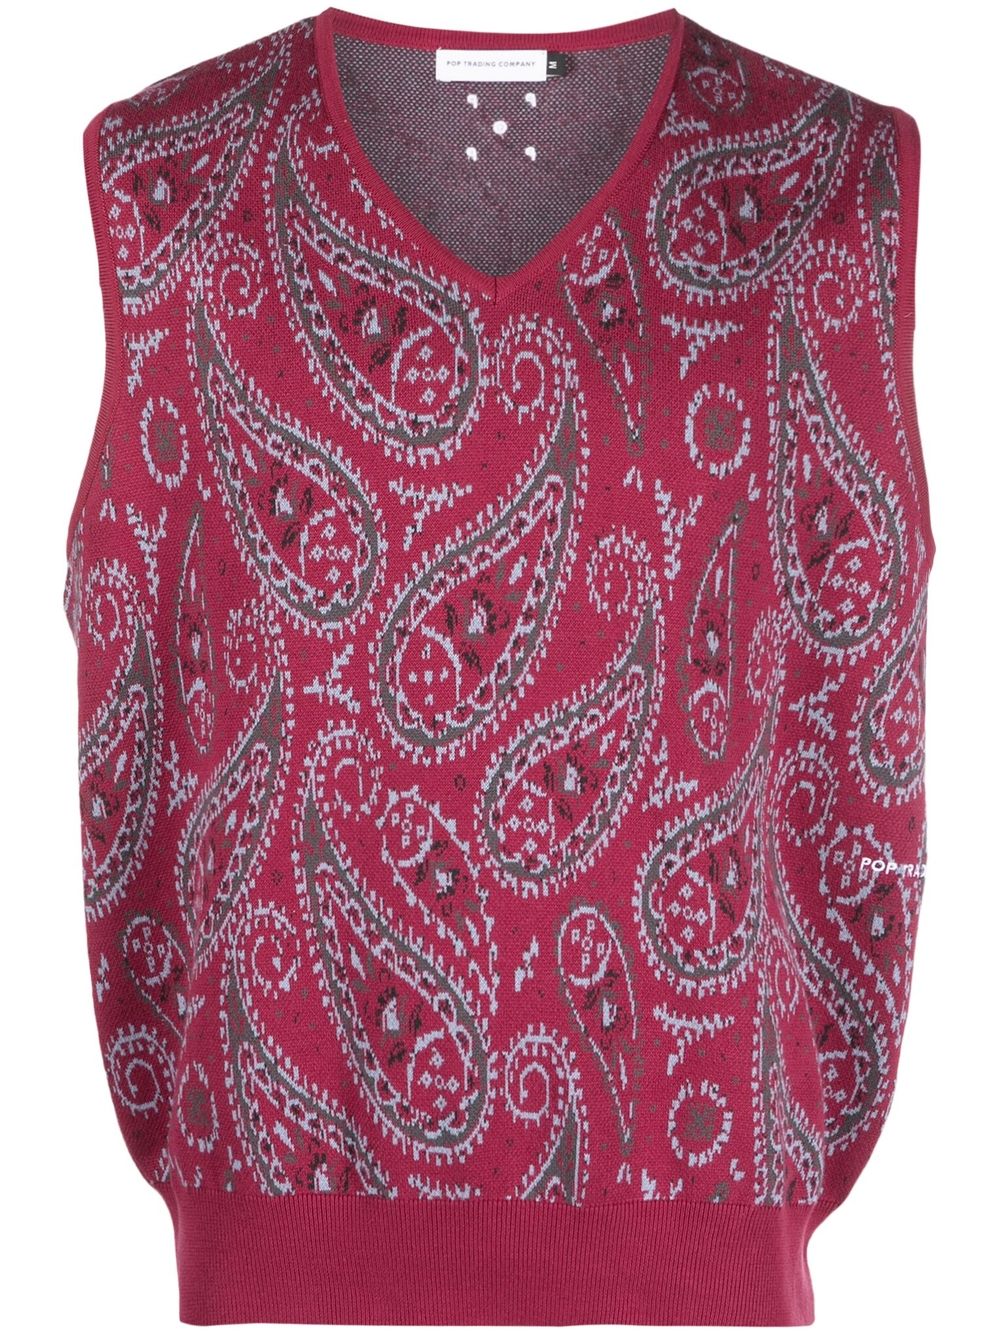 Pop Trading Company KNITTED PAISLEY VEST